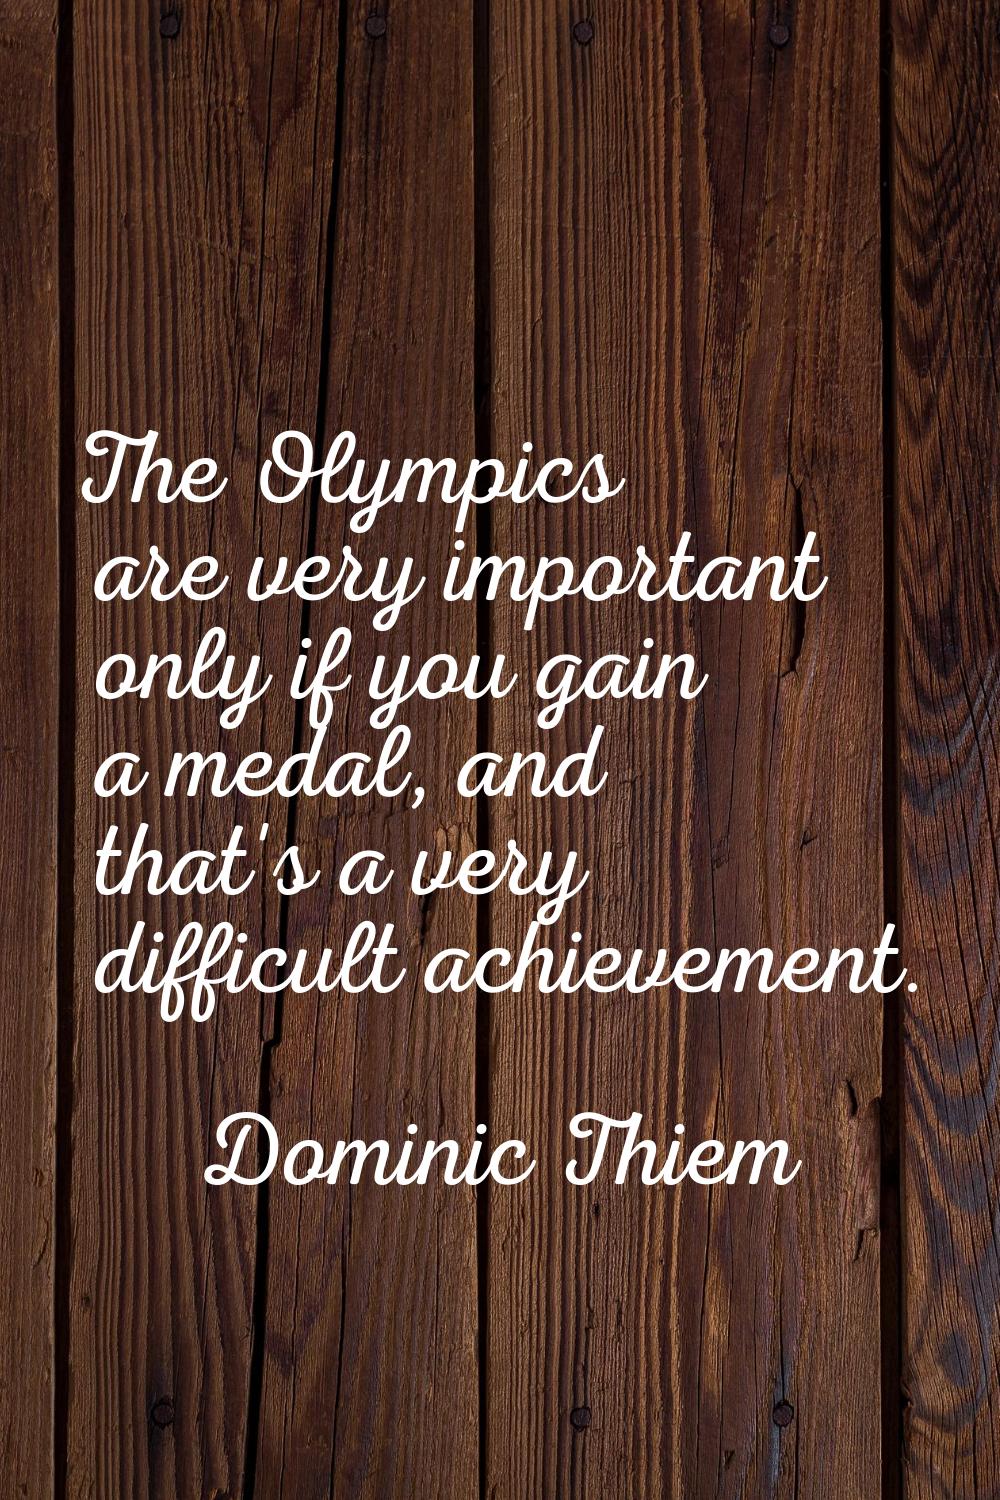 The Olympics are very important only if you gain a medal, and that's a very difficult achievement.